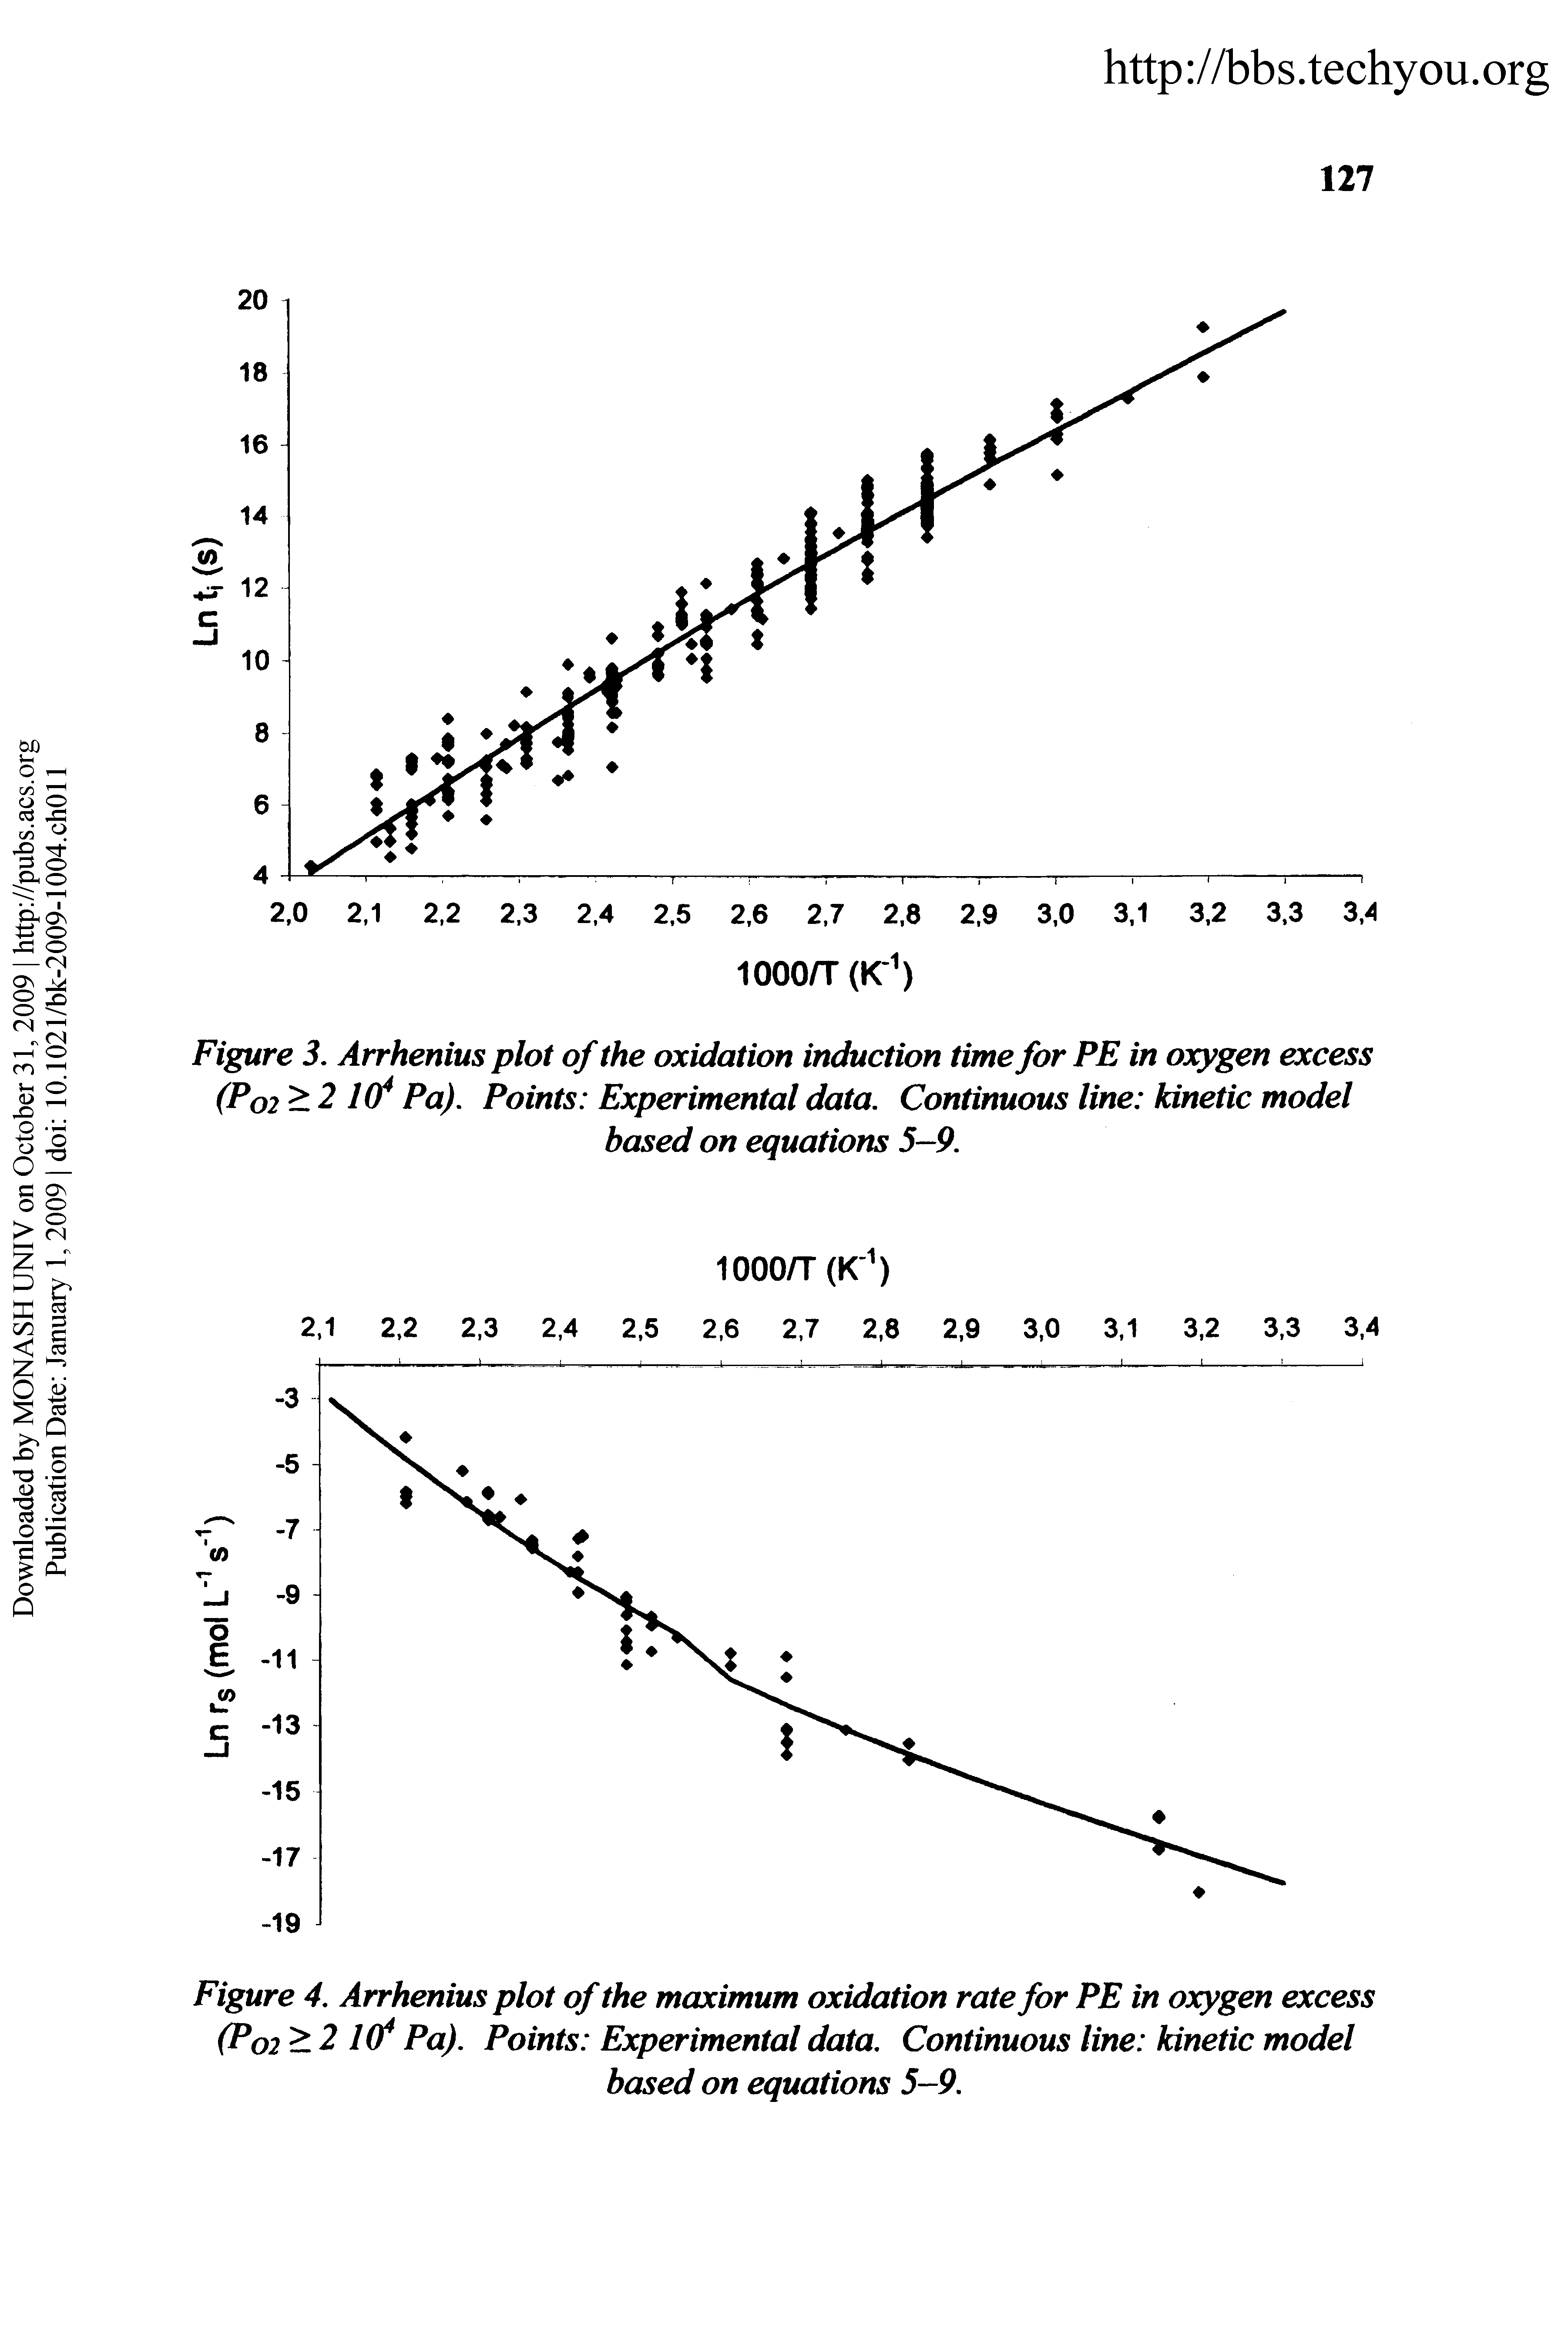 Figure 3. Arrhenius plot of the oxidation induction time for PE in oxygen excess (Po2 2 10 Pa). Points Experimental data. Continuous line kinetic model based on equations 5—9.